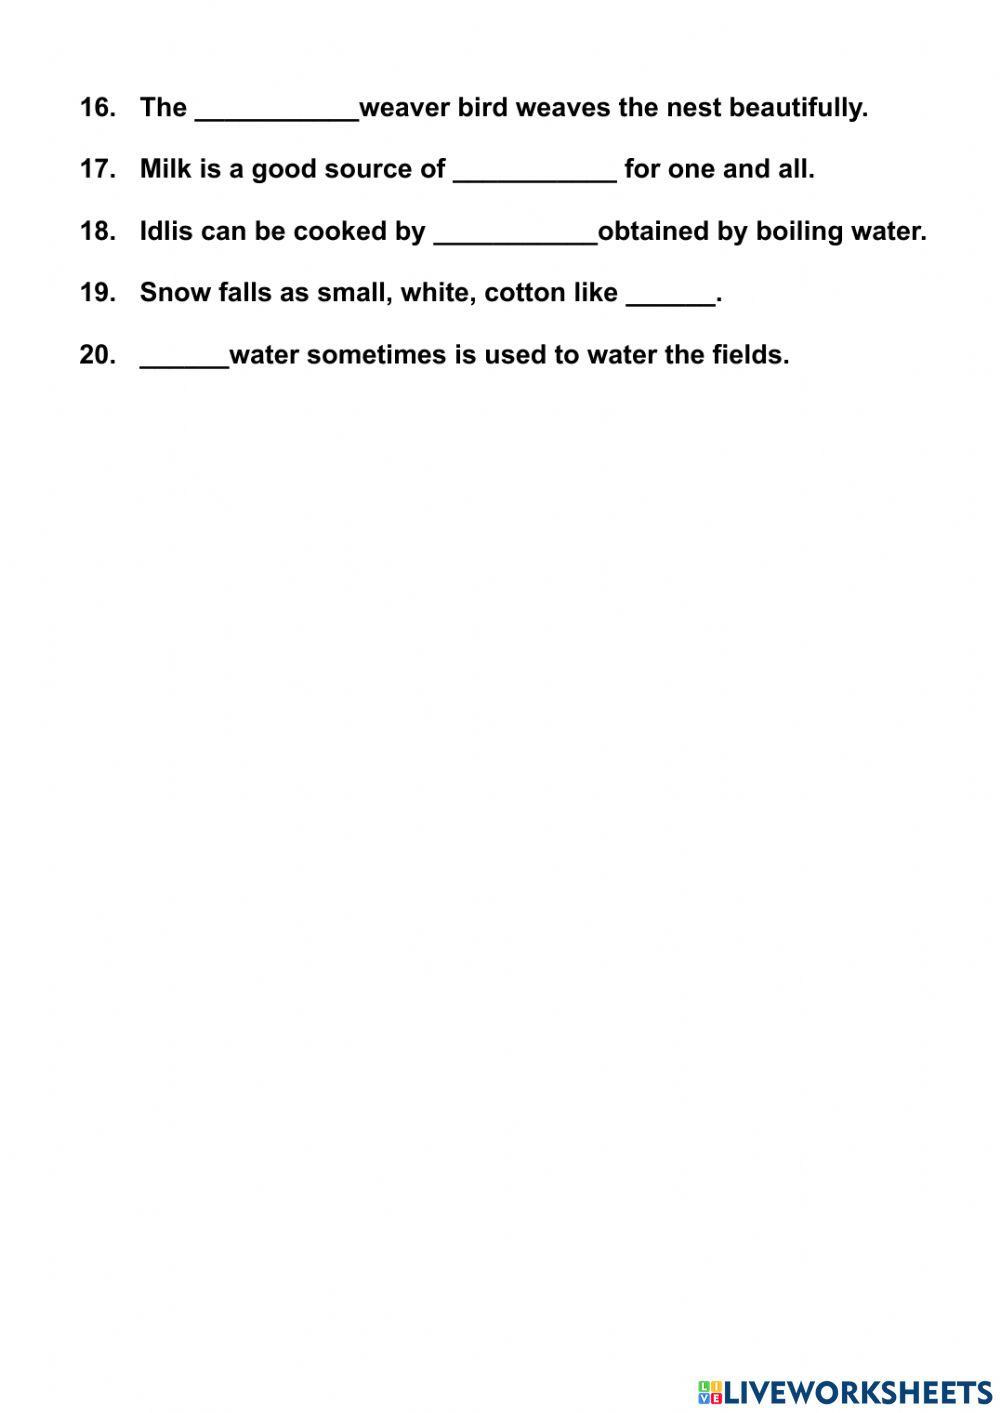 Science Revision Worksheet for class 3